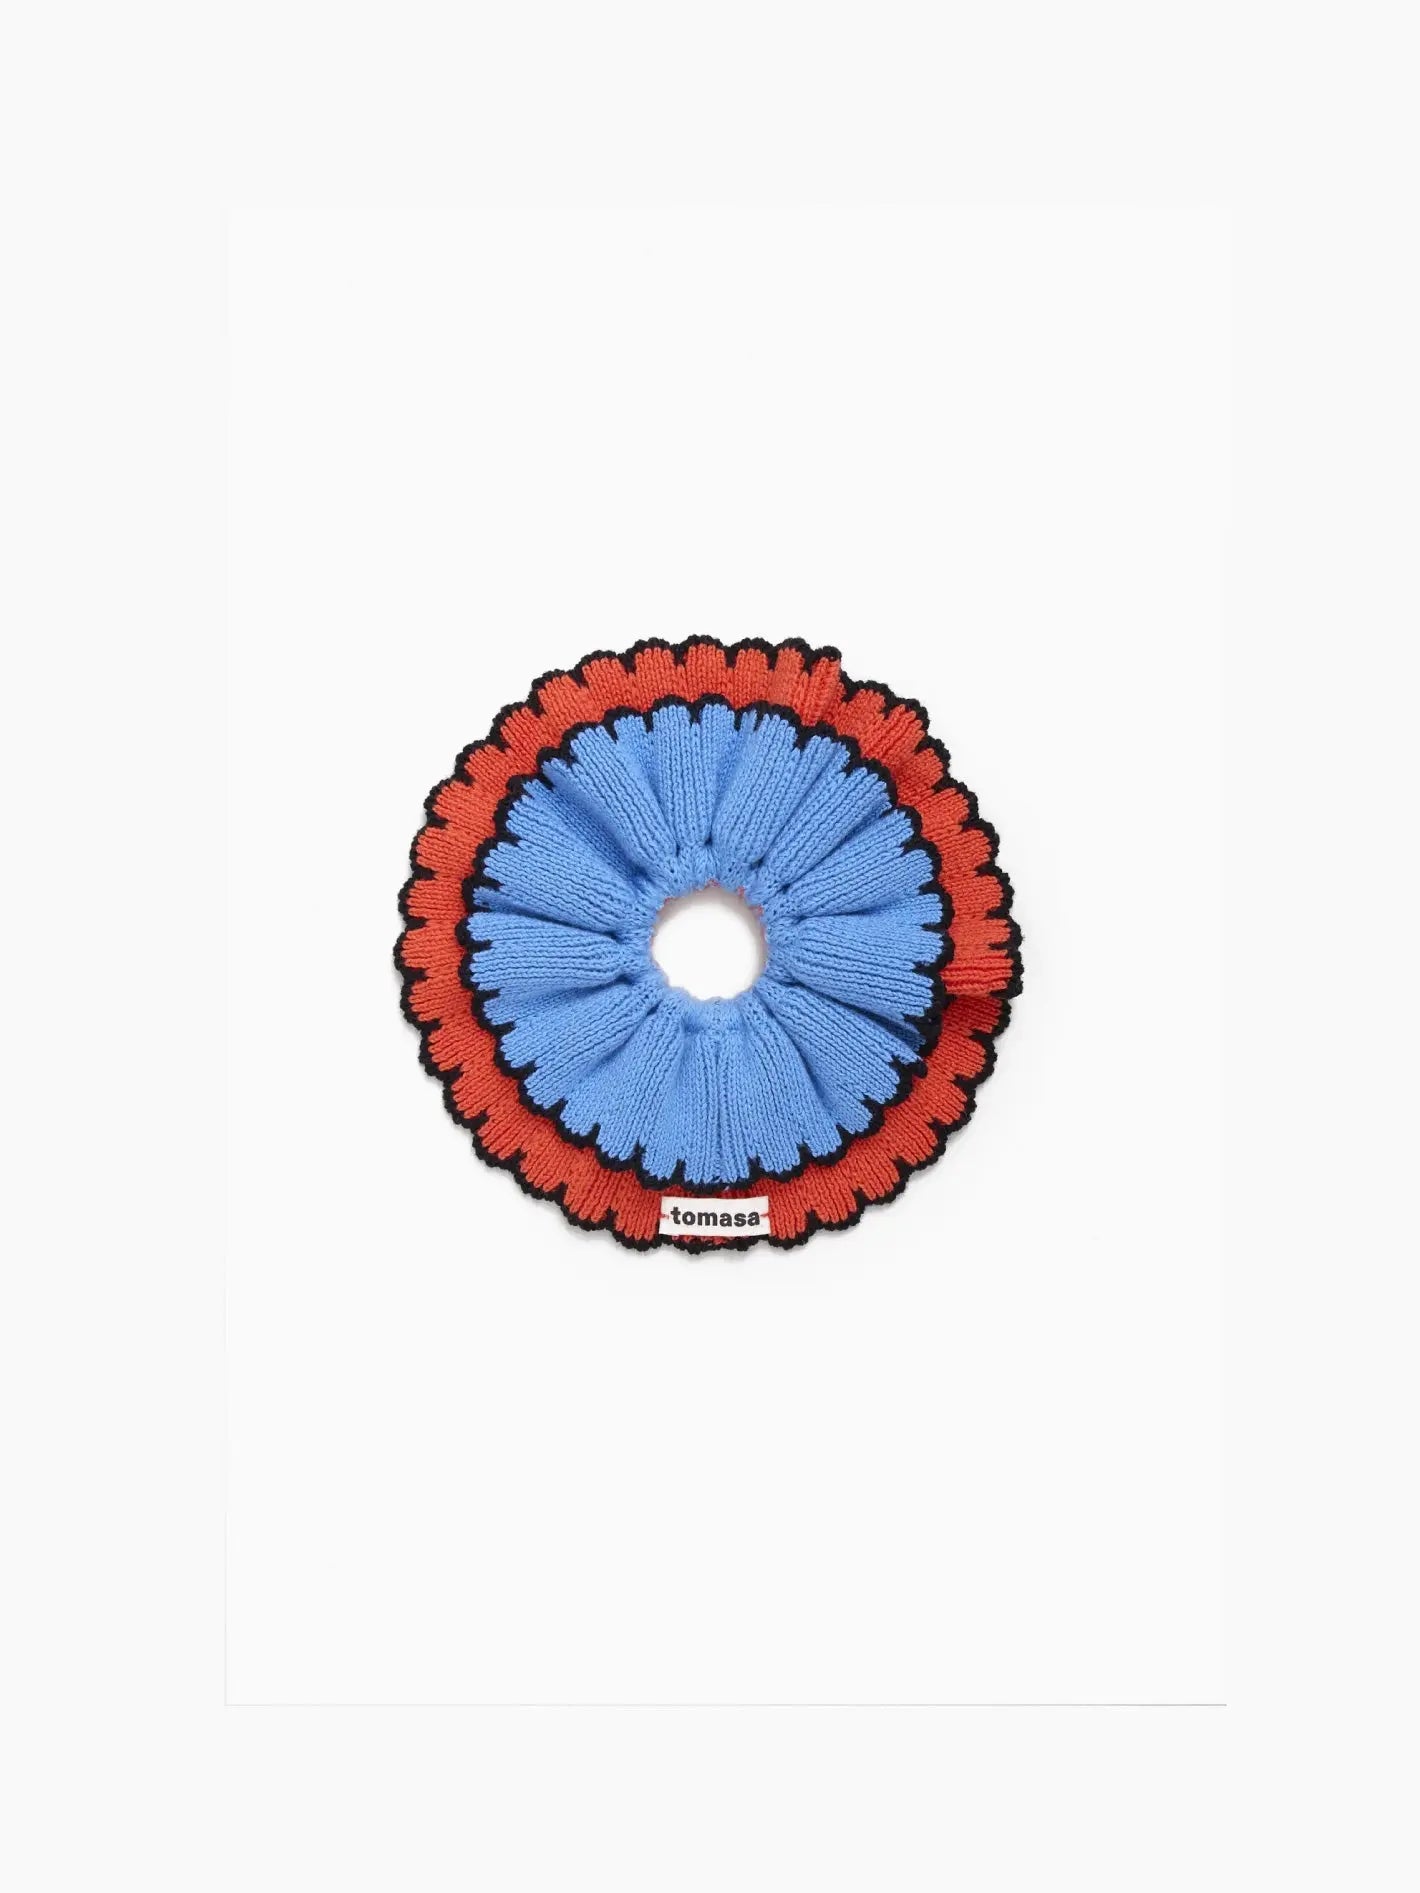 A round, fabric hair scrunchie in blue and red colors. The inner portion of the scrunchie is blue, while the outer ring is red with a decorative edge. A small label with the text "Tomasa" is visible at the bottom. The Ruffle Scrunchie Lumbre, available at Bassalstore in Barcelona, rests on a plain white background.